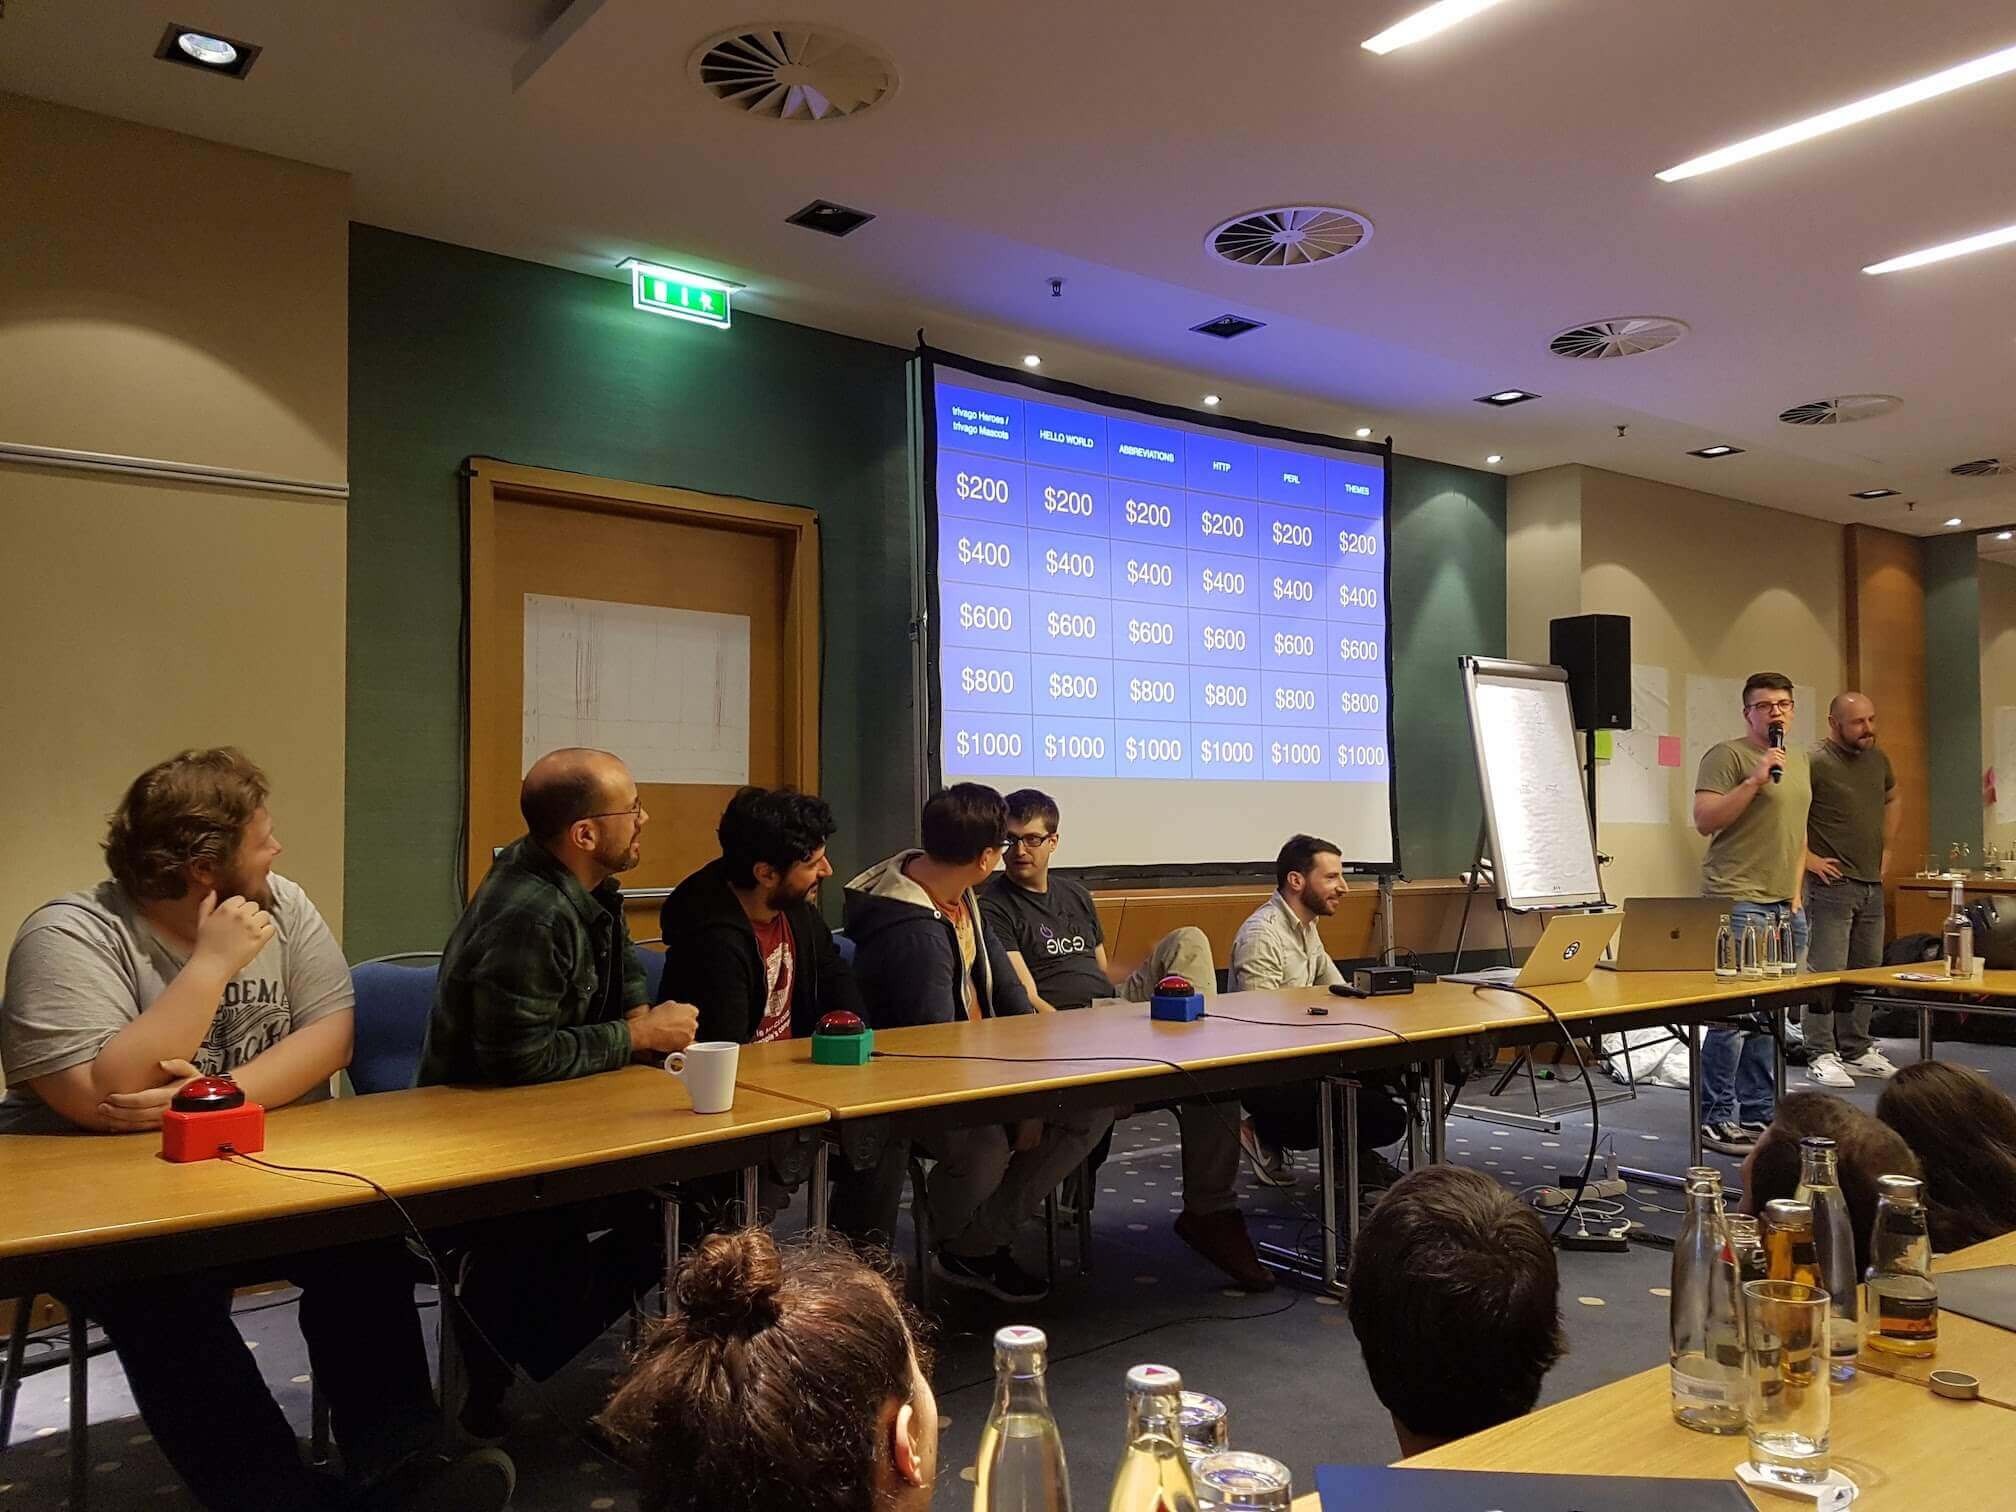 Playing a Jeopardy! game at trivago's internal tech conference on the 19th of March 2019 with our self-made game show buzzers.